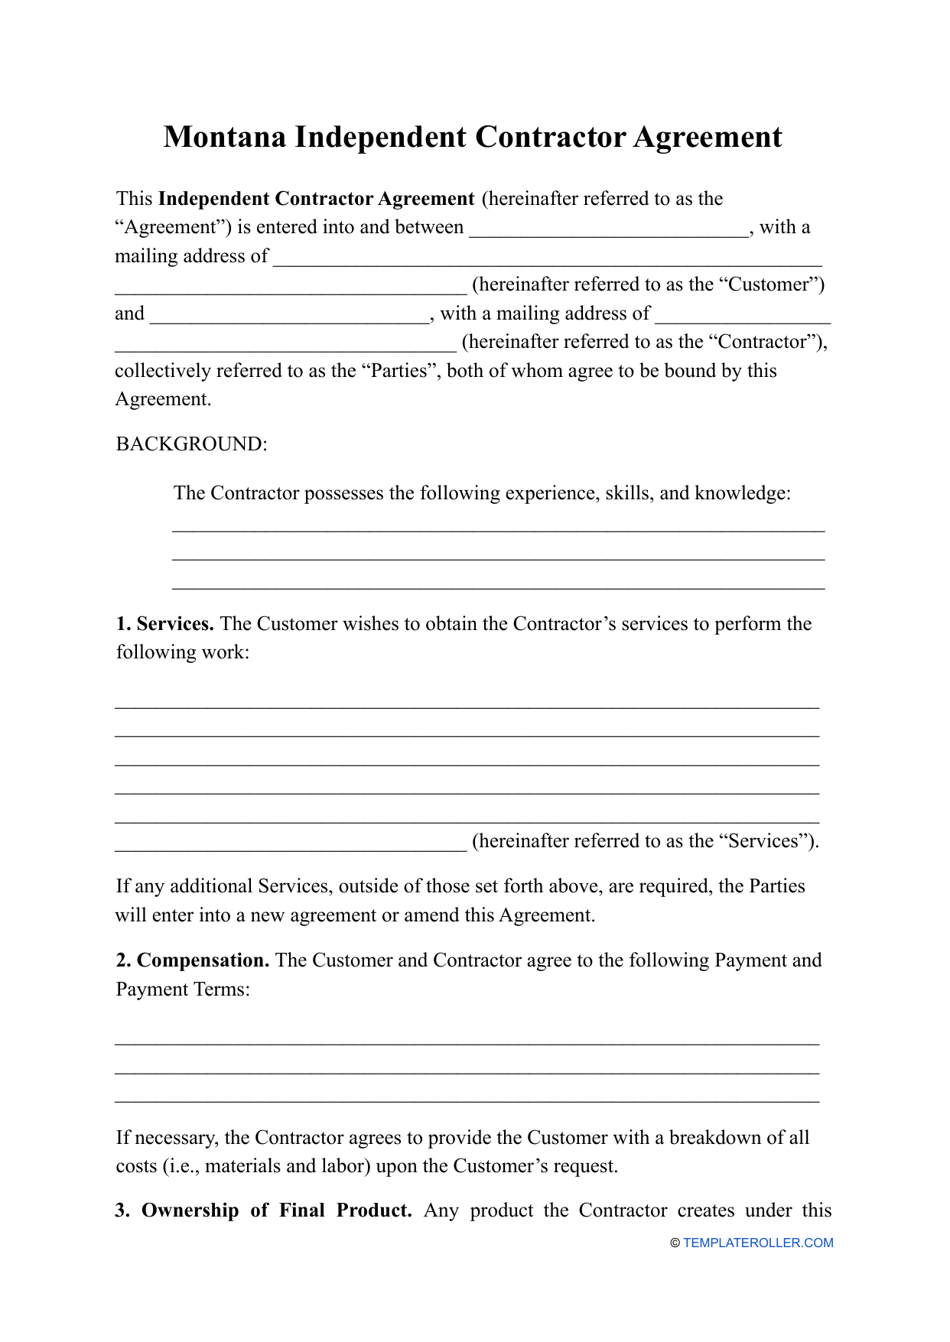 Independent Contractor Agreement Template - Montana, Page 1